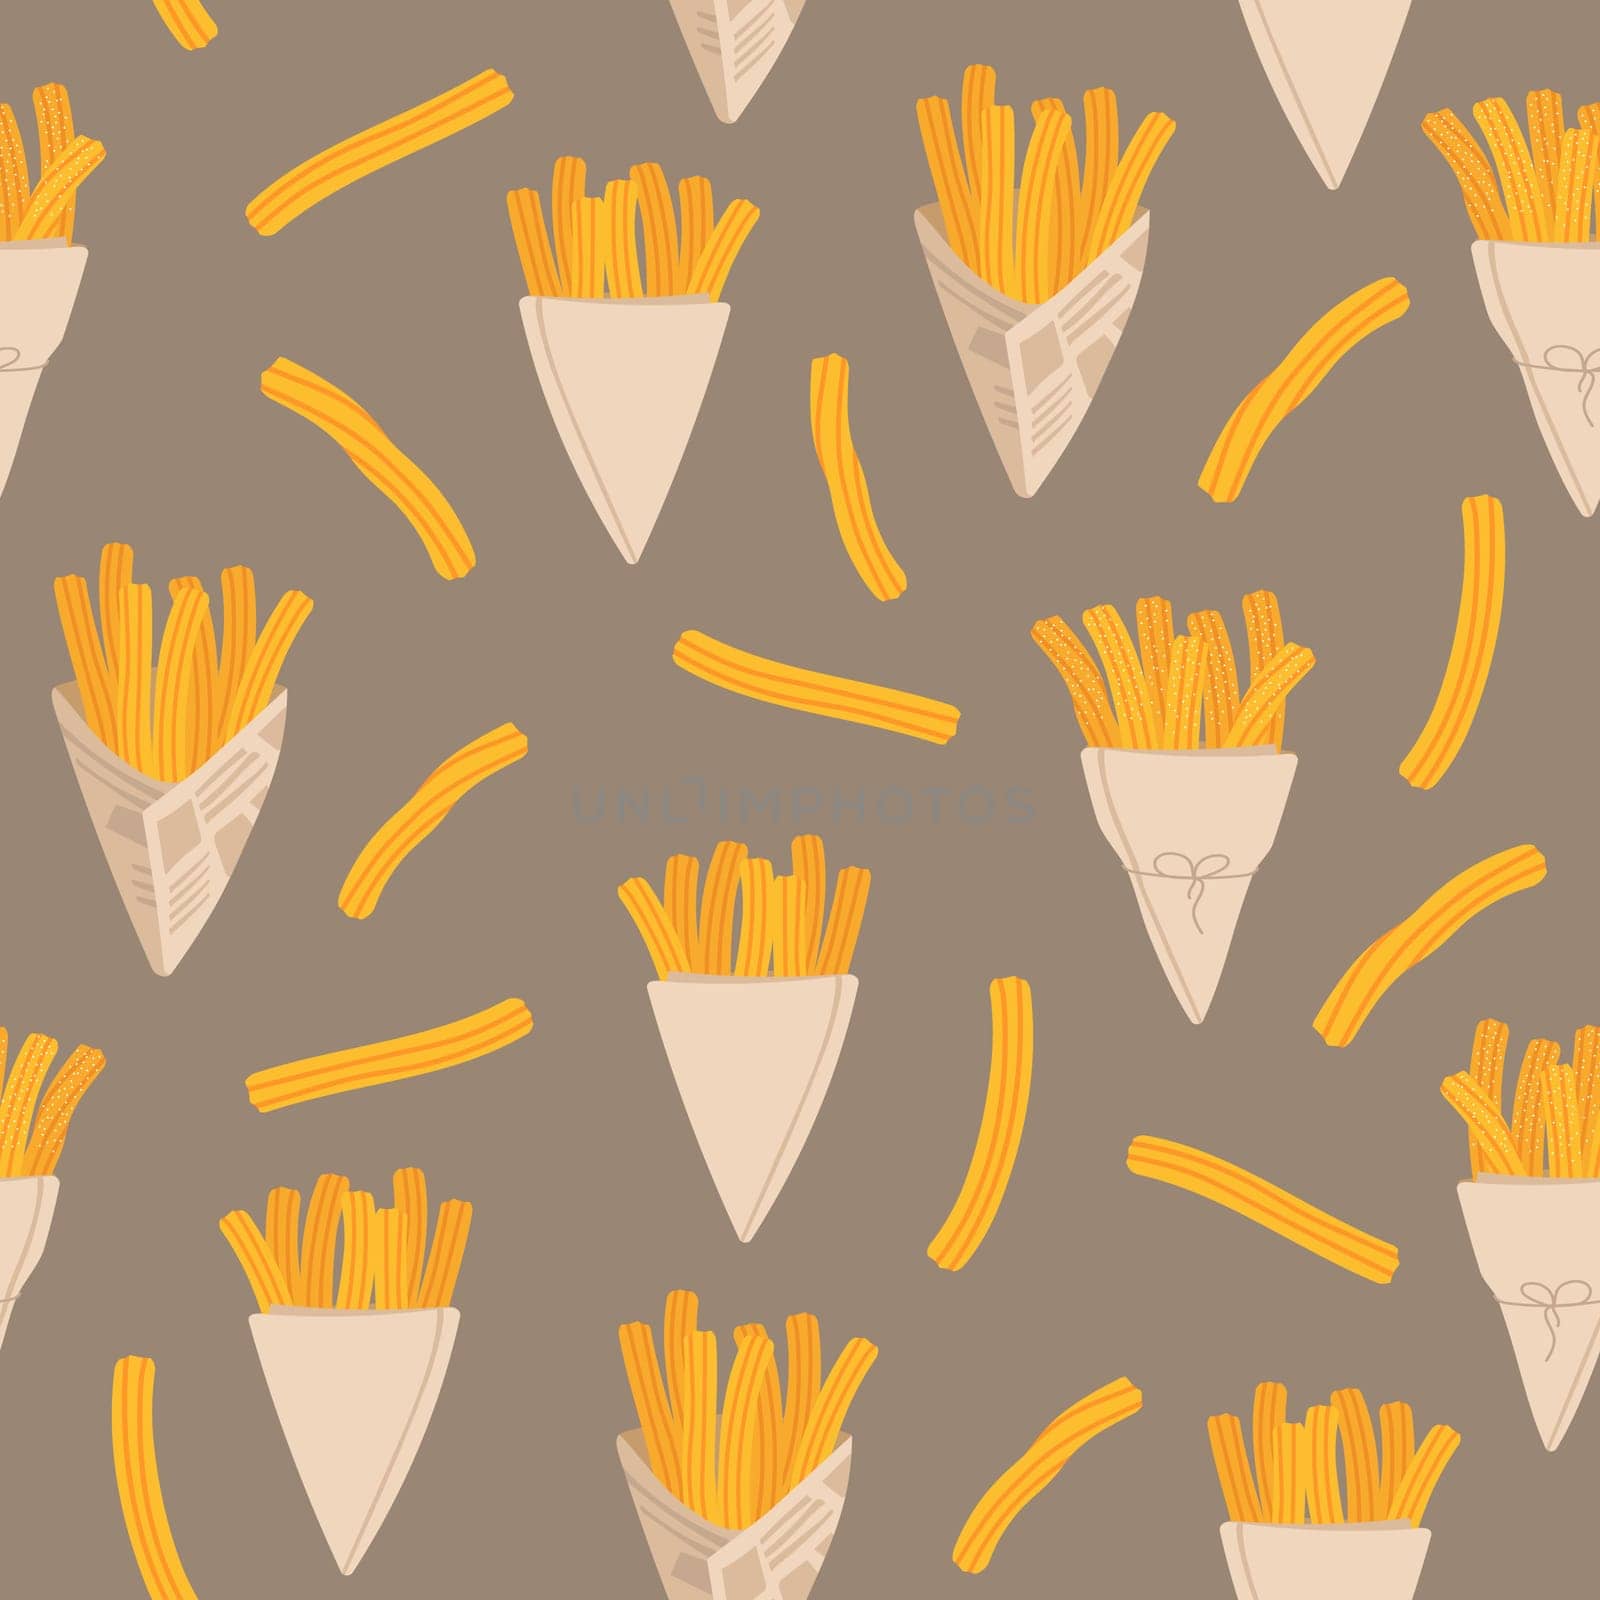 Seamless pattern with churros. Mexican or Spanish traditional dessert. Endlessly repeating churros. Vector illustration for design.